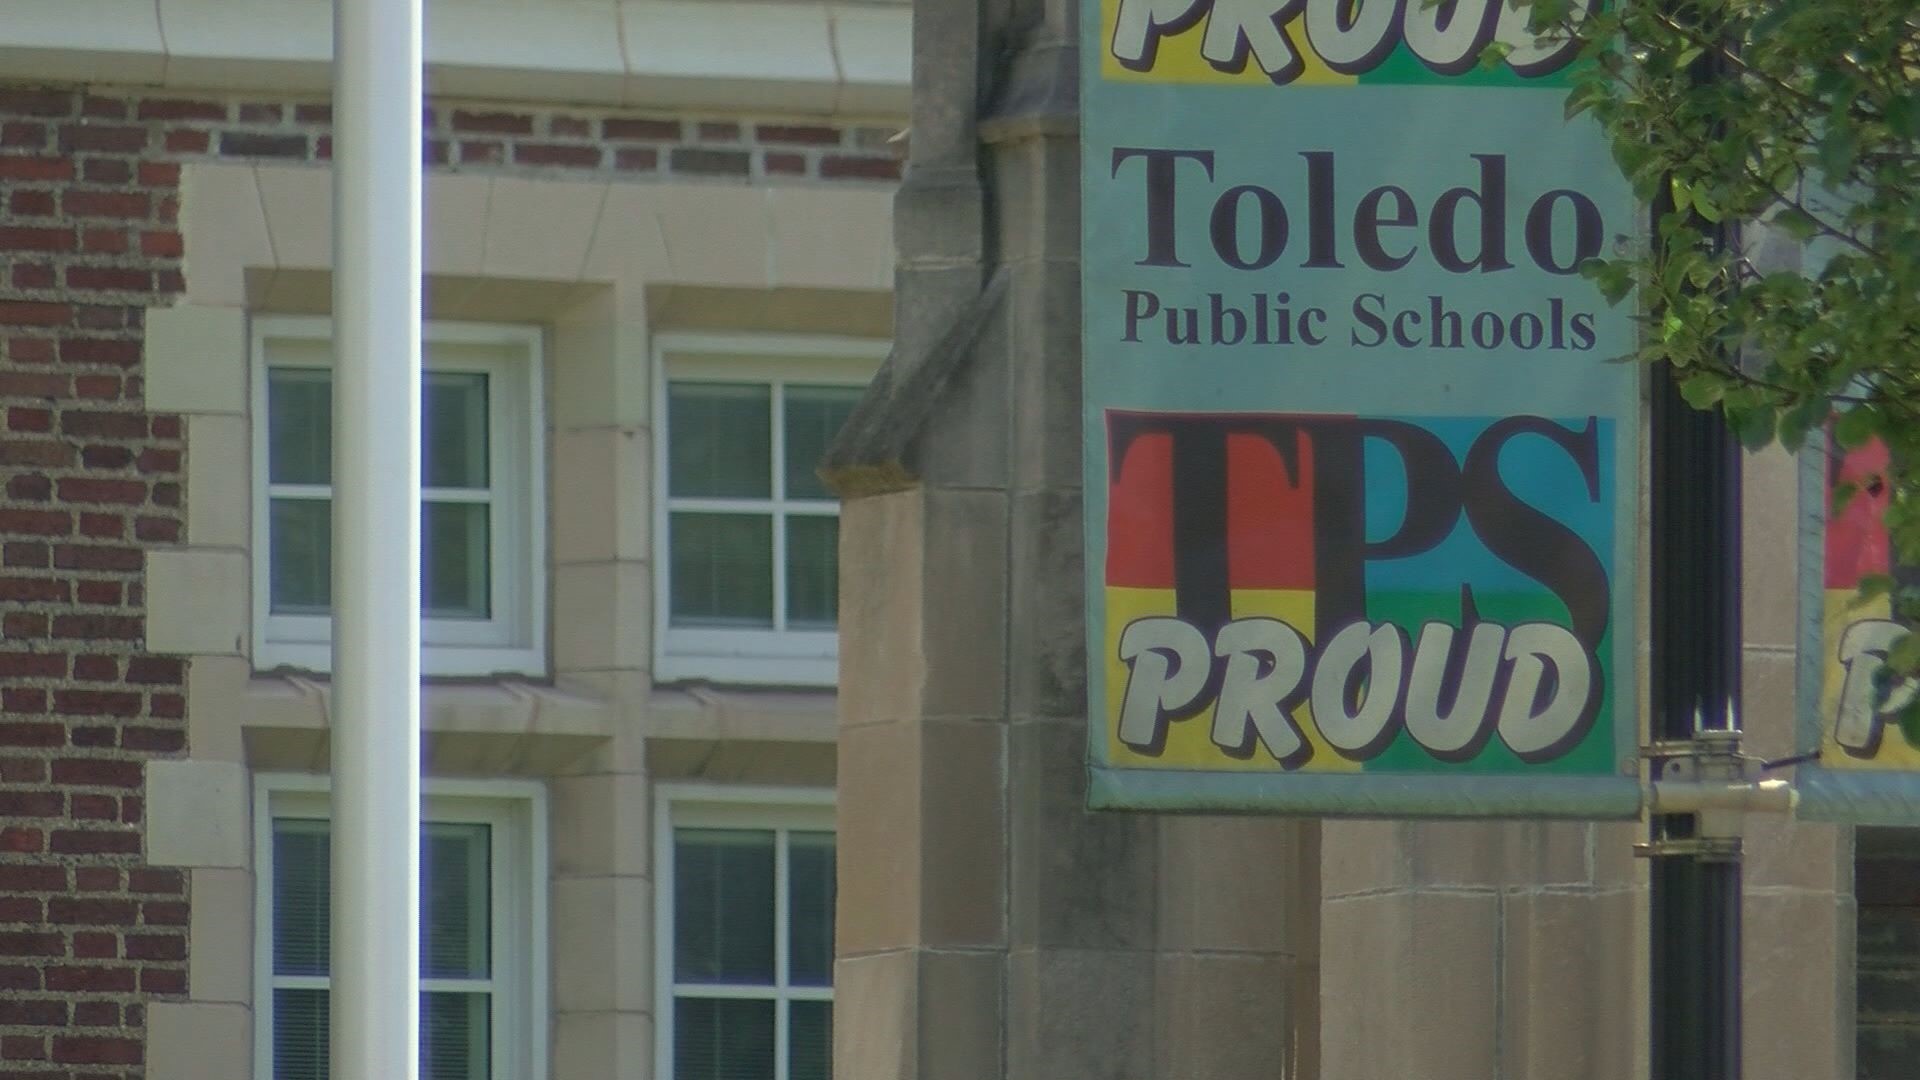 In an update posted on Twitter, Toledo Public Schools Superintendent Romules Durant cites "severe wind chills" as the cause.